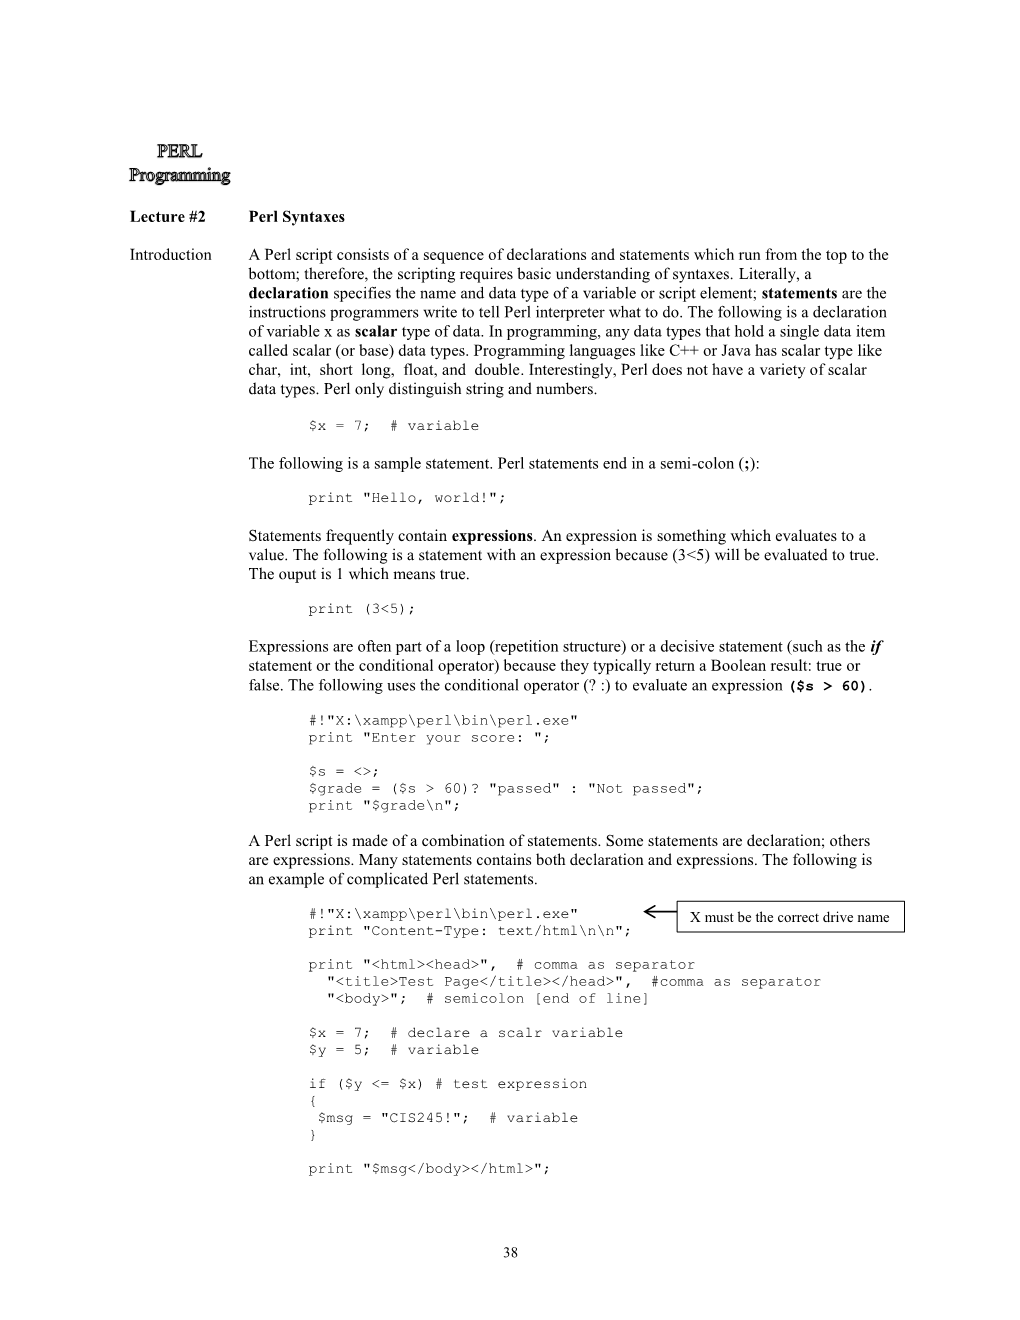 Lecture #2 Perl Syntaxes Introduction a Perl Script Consists of a Sequence